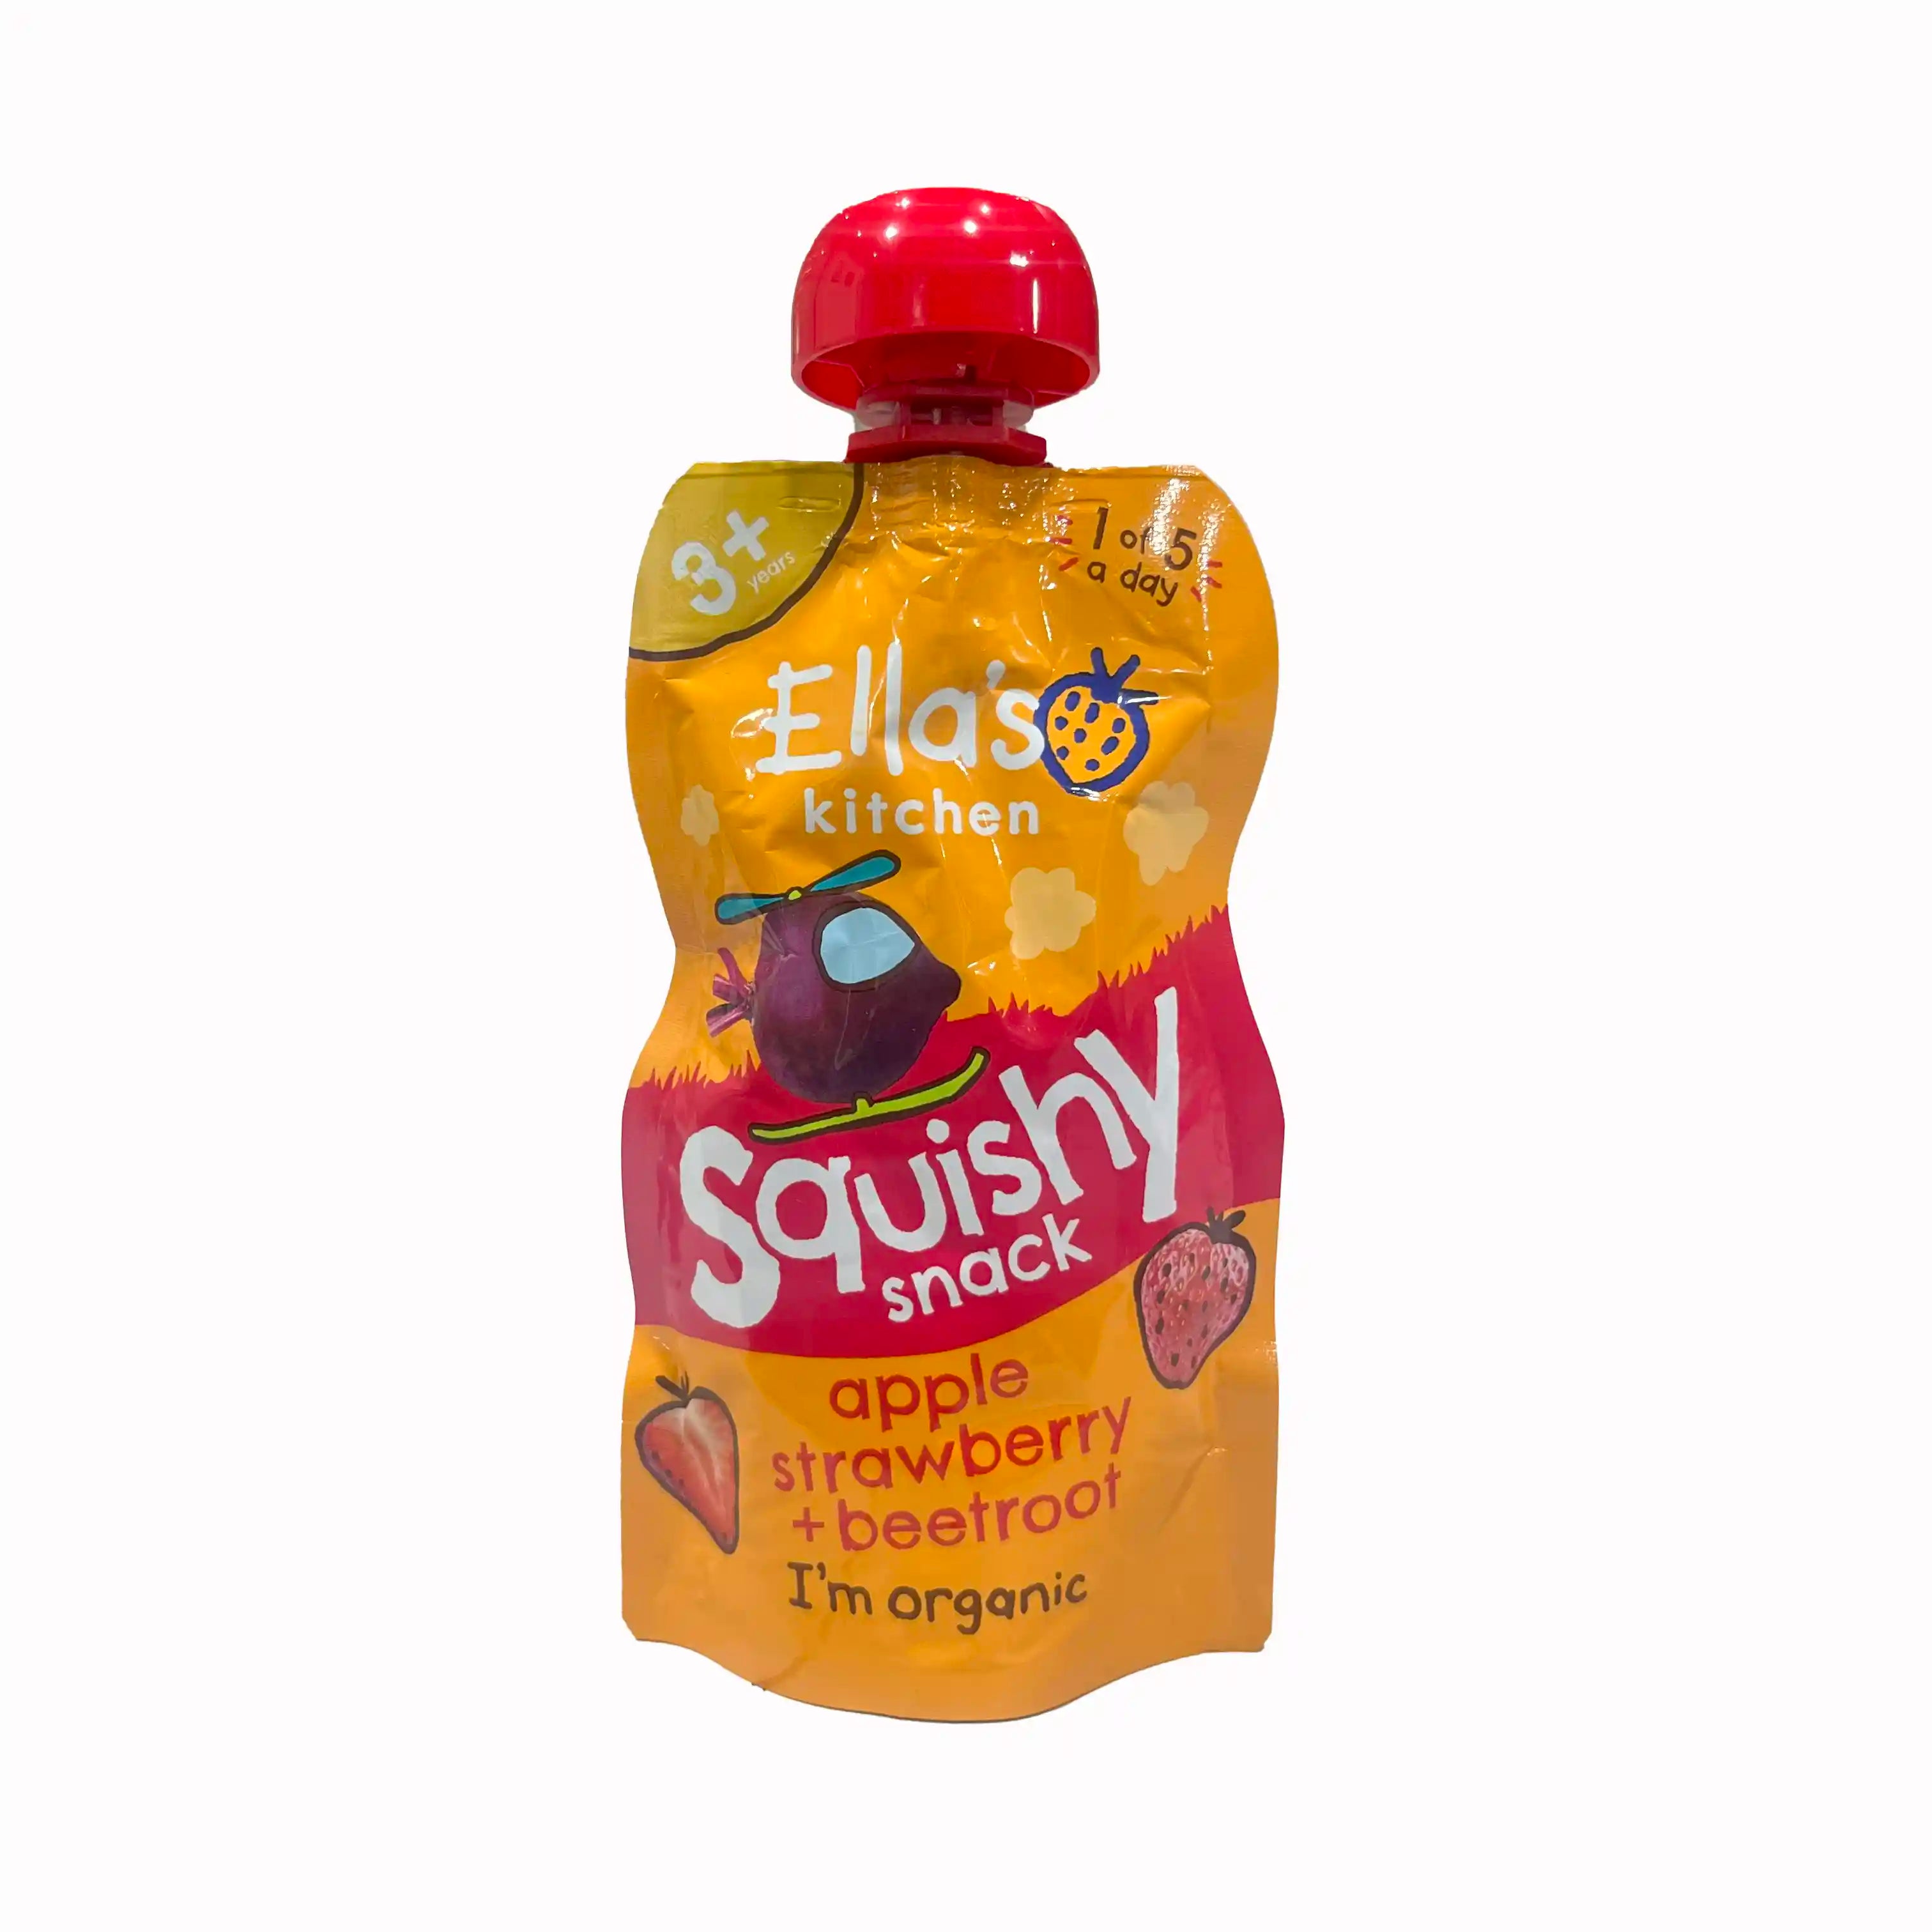 Buy Ella's Kitchen Organic Squishy Snack with Apple, Strawberry & Beetroot Online in India at uyyaala.com